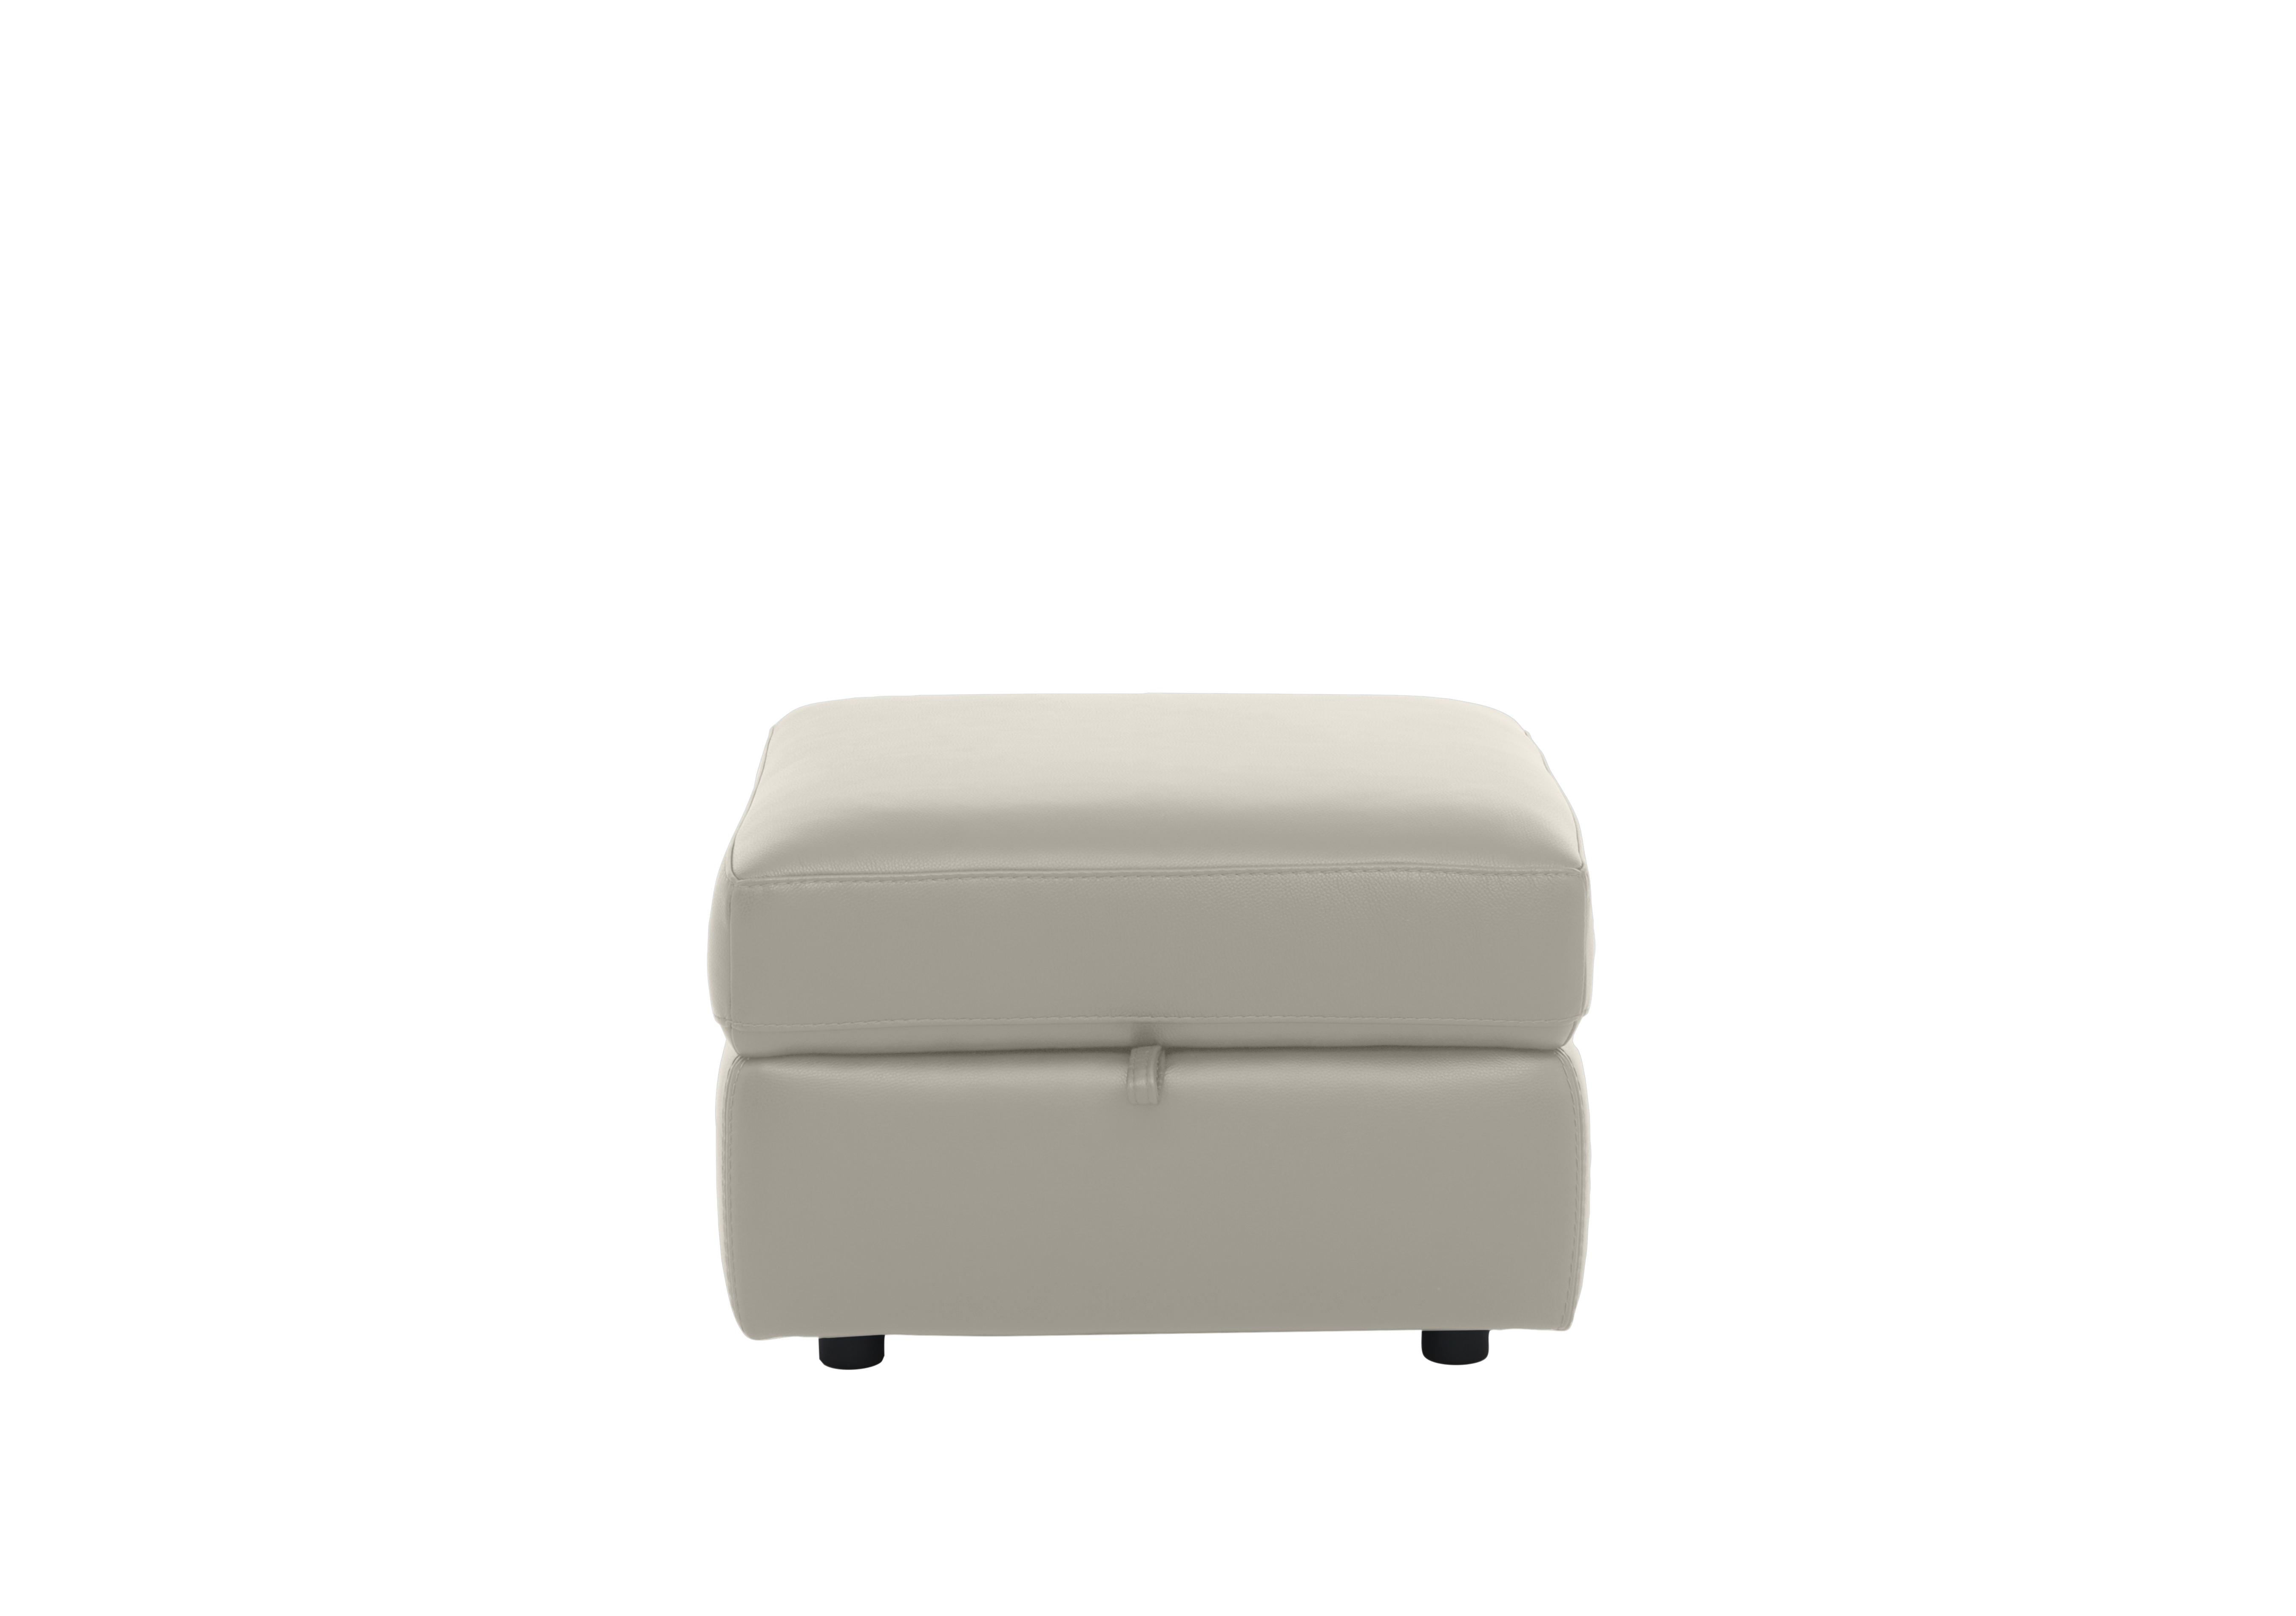 Leather Storage Footstool in Bx-251e Grey on Furniture Village